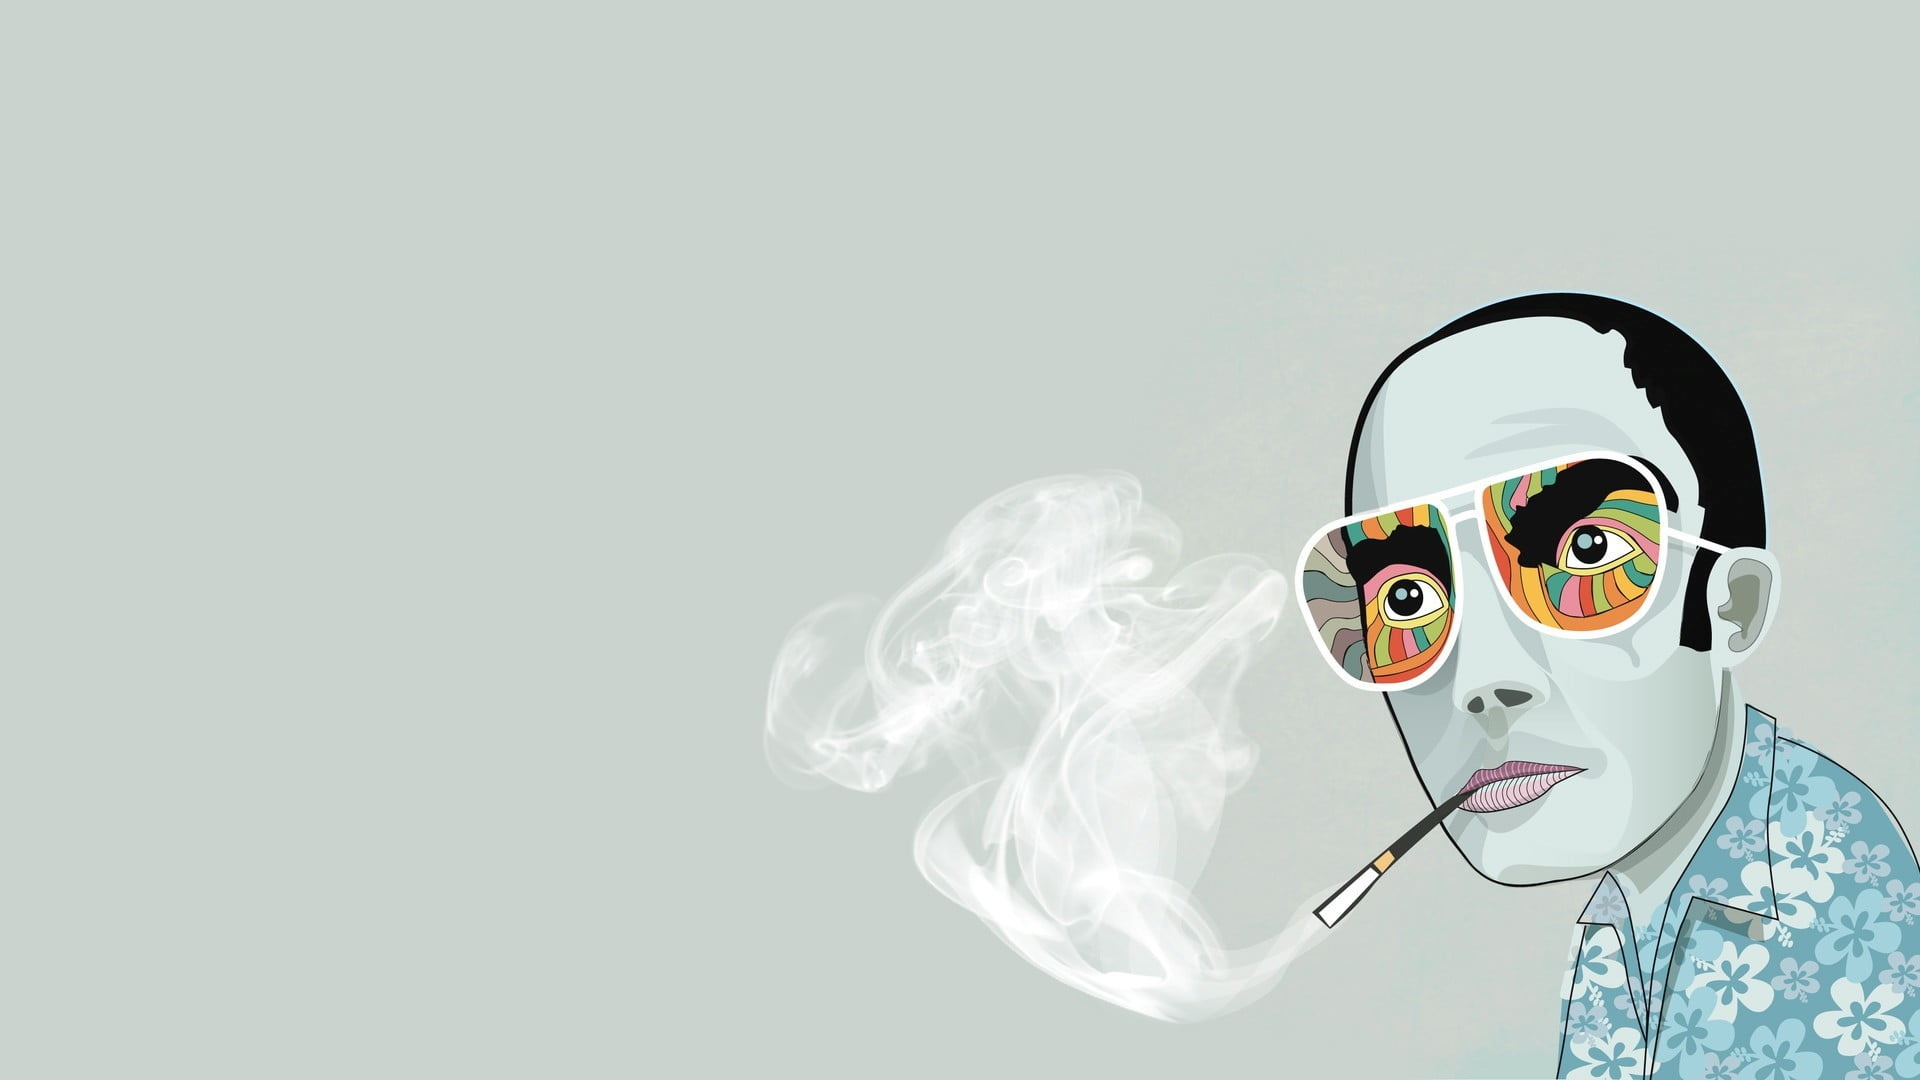 Hunter S. Thompson, Smoking cigarette man, Psychedelic minimalism, Fear and Loathing connection, 1920x1080 Full HD Desktop